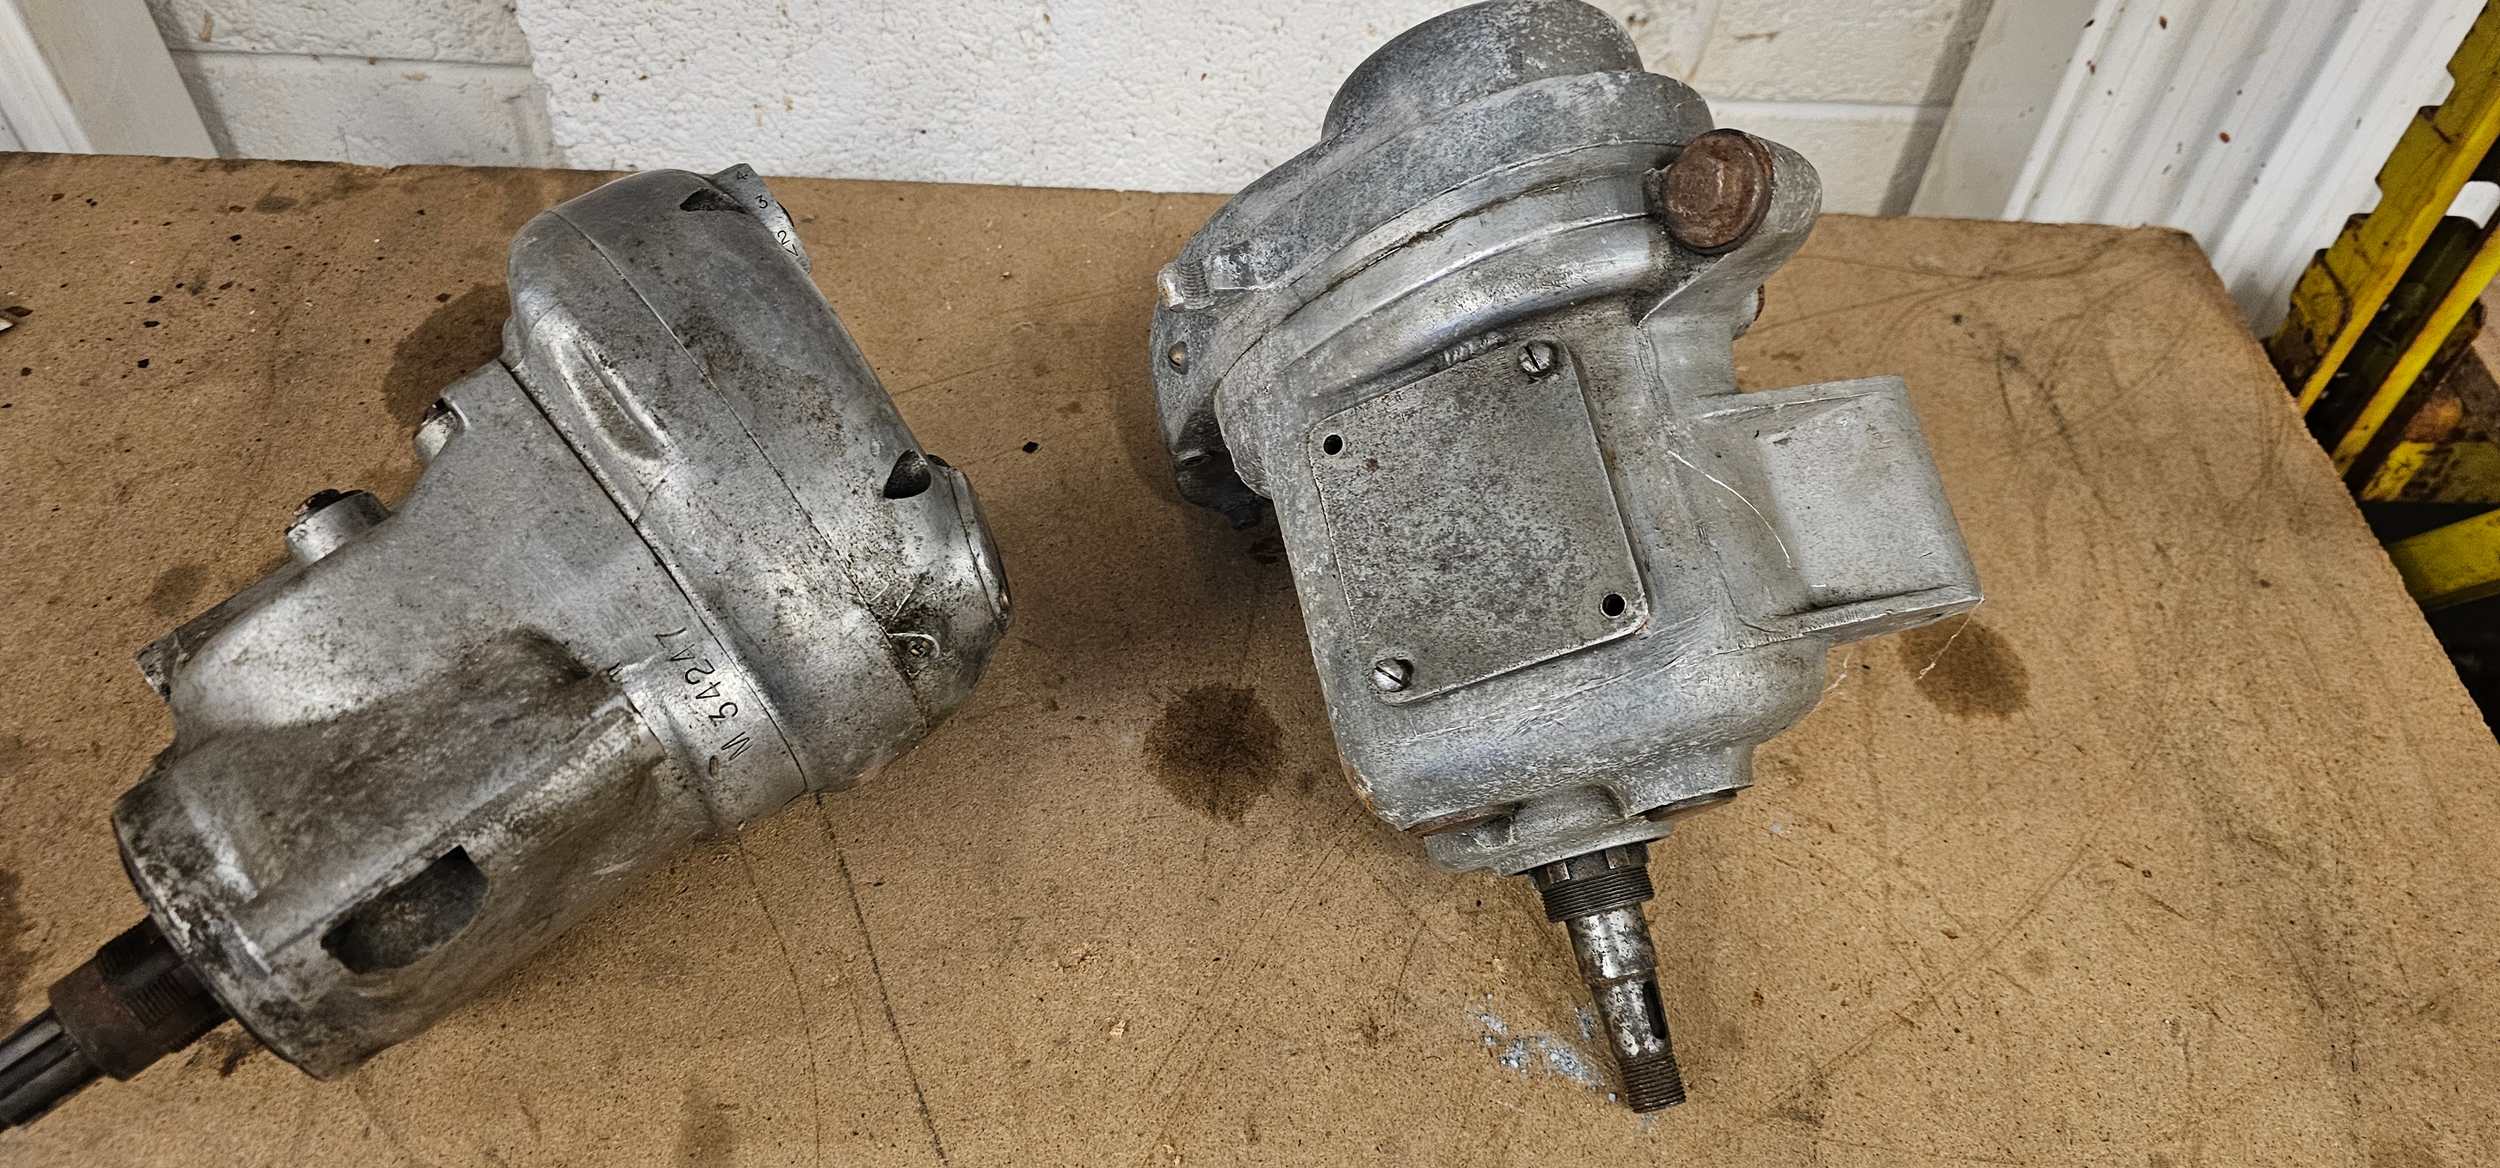 A BSA gearbox and another gearbox - Image 2 of 3